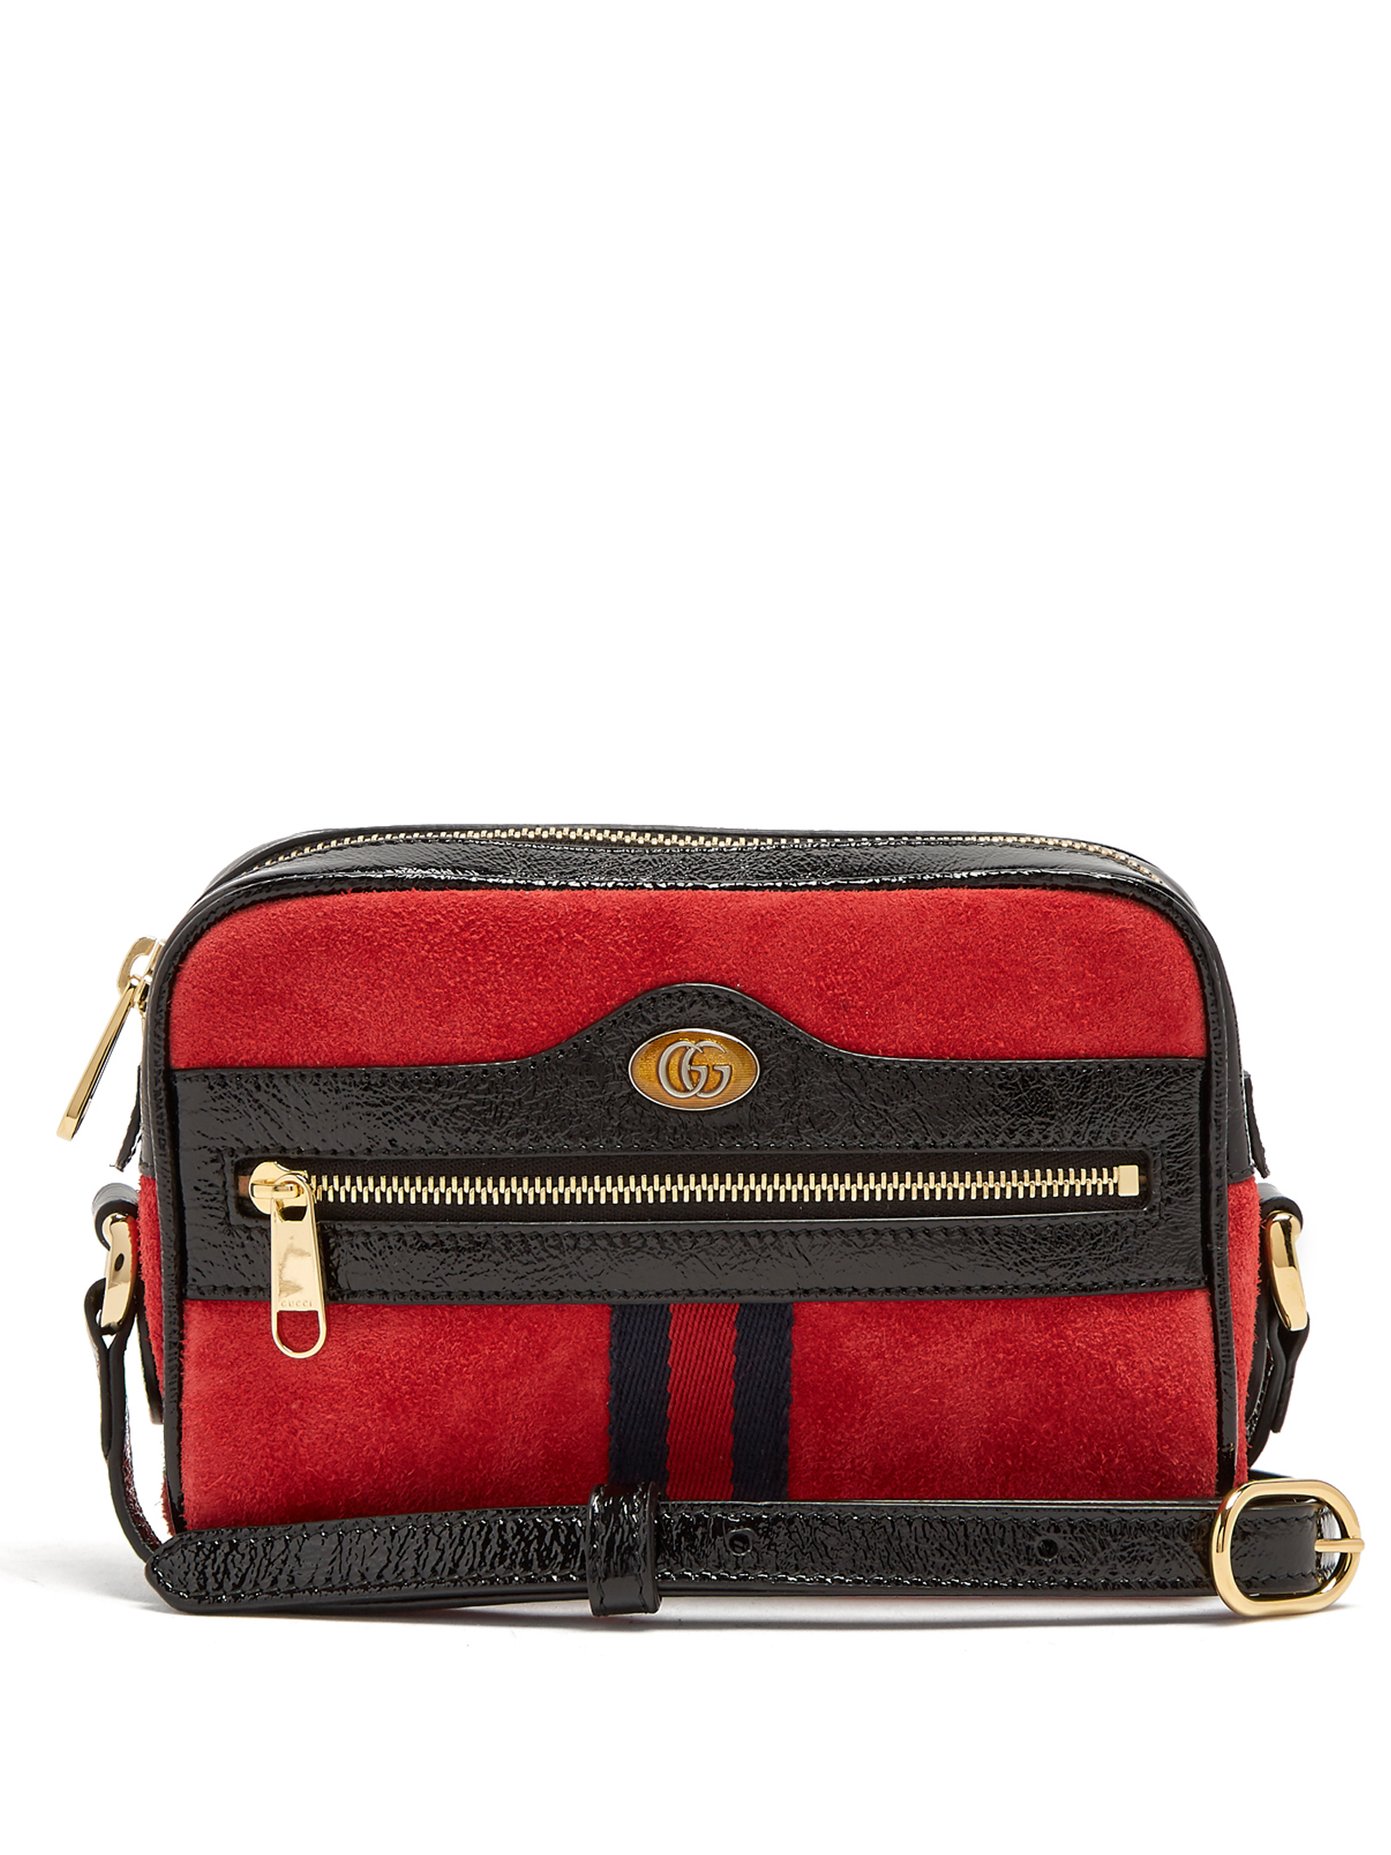 gucci ophidia red bag